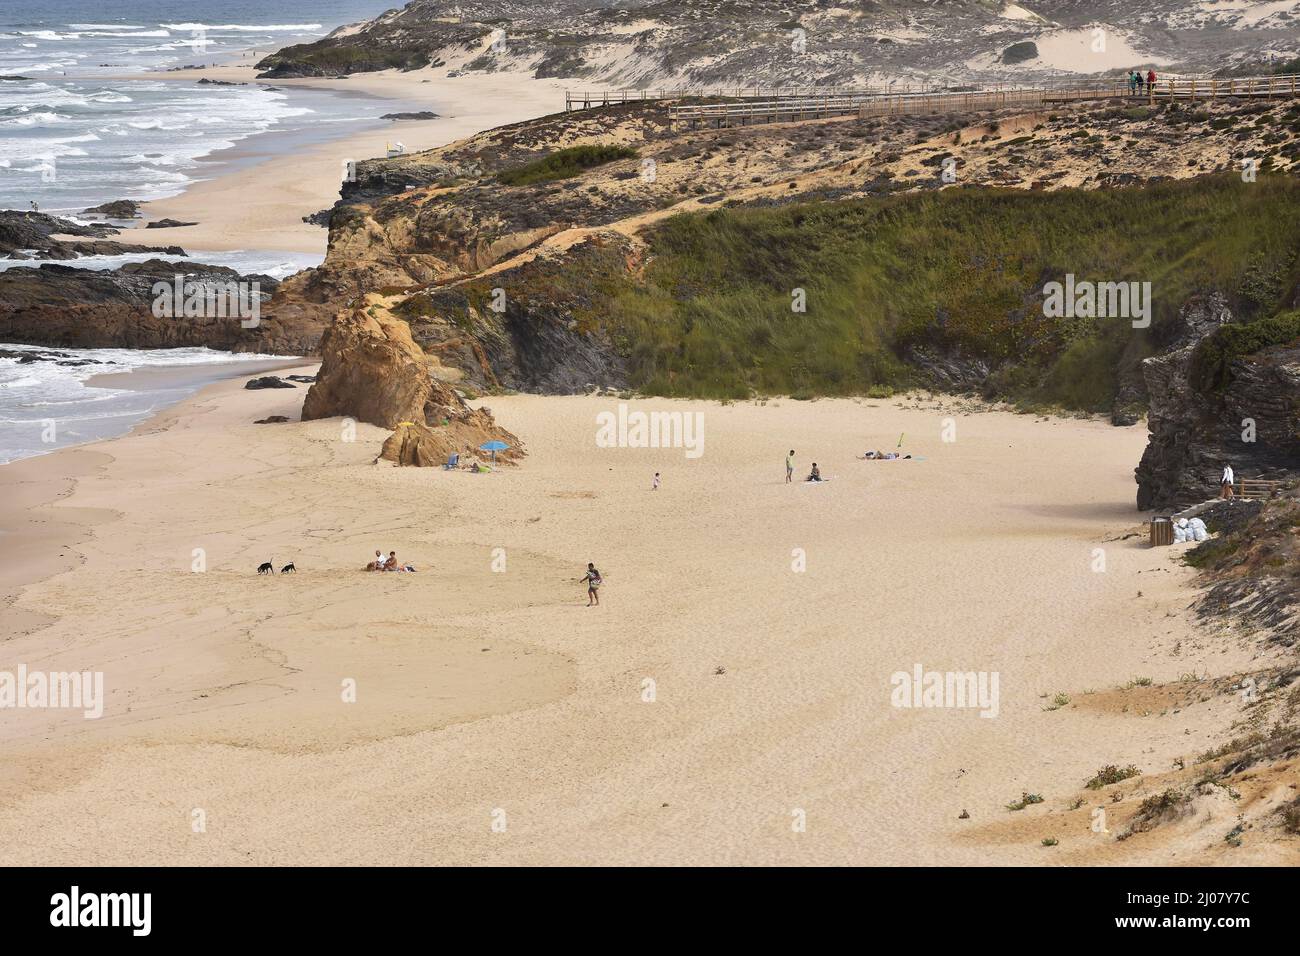 Grassy sand dunes, Praia do Malhao beach, Southwest Alentejo and Vicentine Coast Natural Park in the southwest of Portugal. Stock Photo